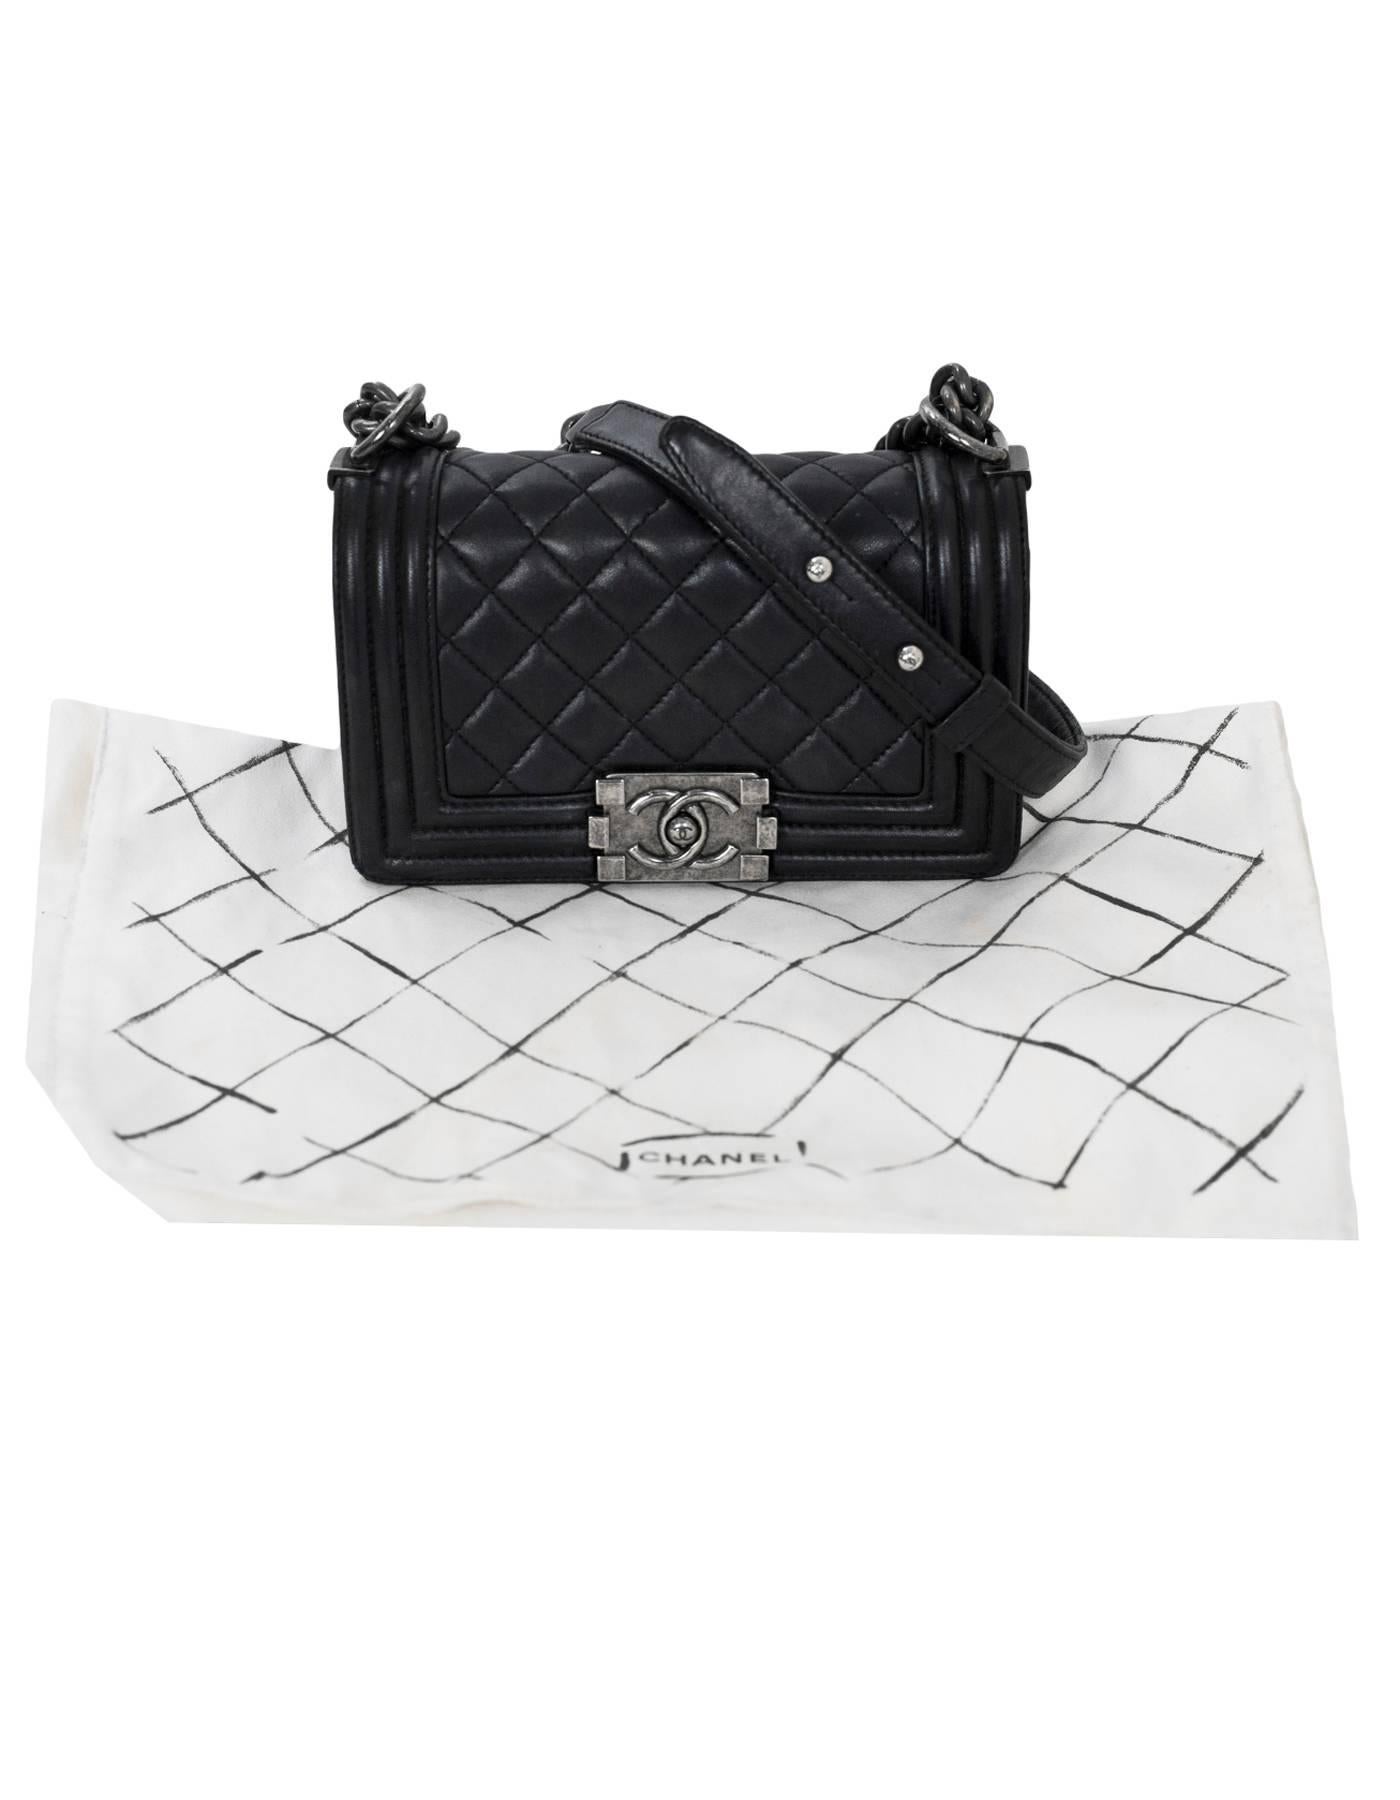 Chanel Black Quilted Lambskin Small Boy Bag with Dust Bag 3